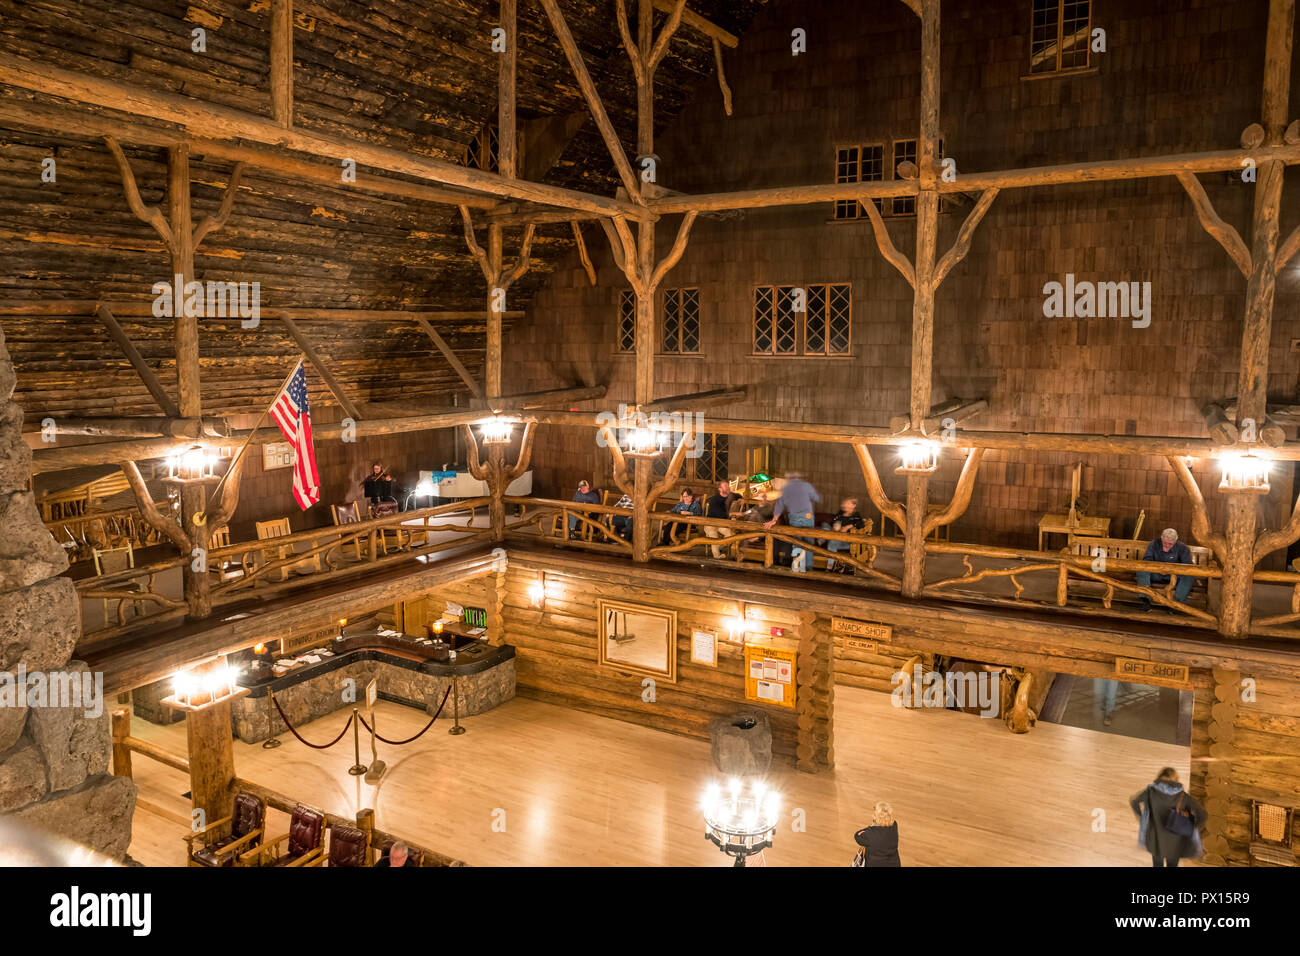 People relax in the atrium of the Old Faithful Inn in Yellowstone National Park, Wyoming, USA Stock Photo